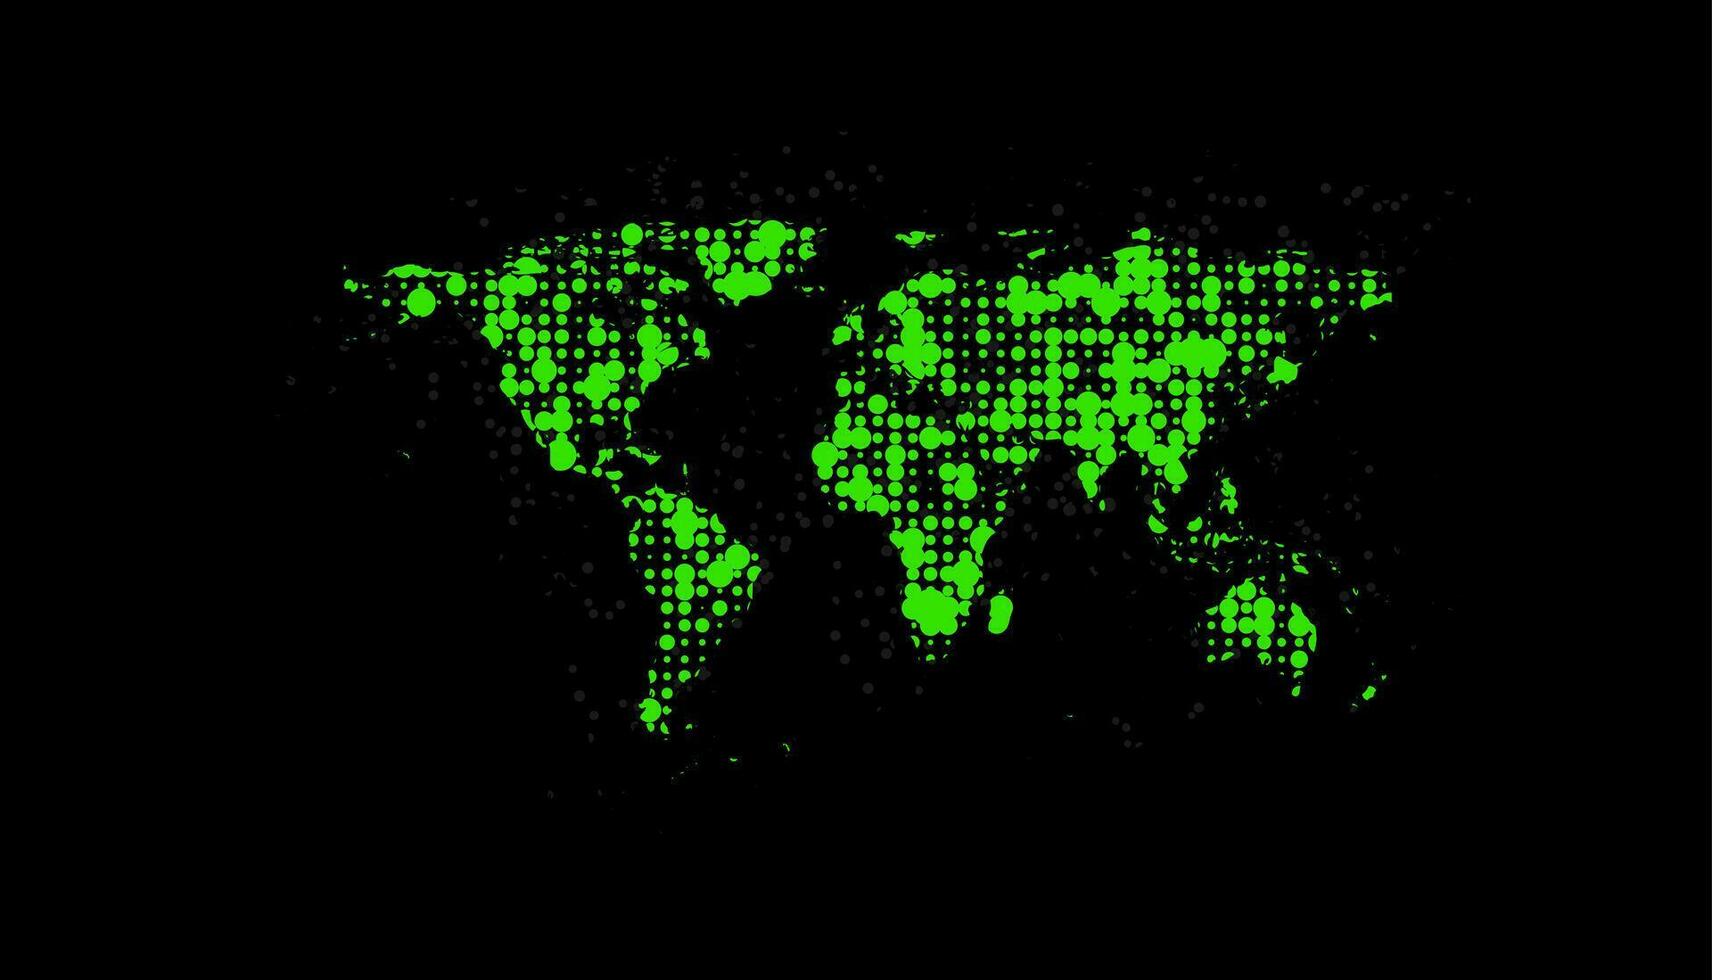 Abstract bright green dotted world map sci-fi background vector